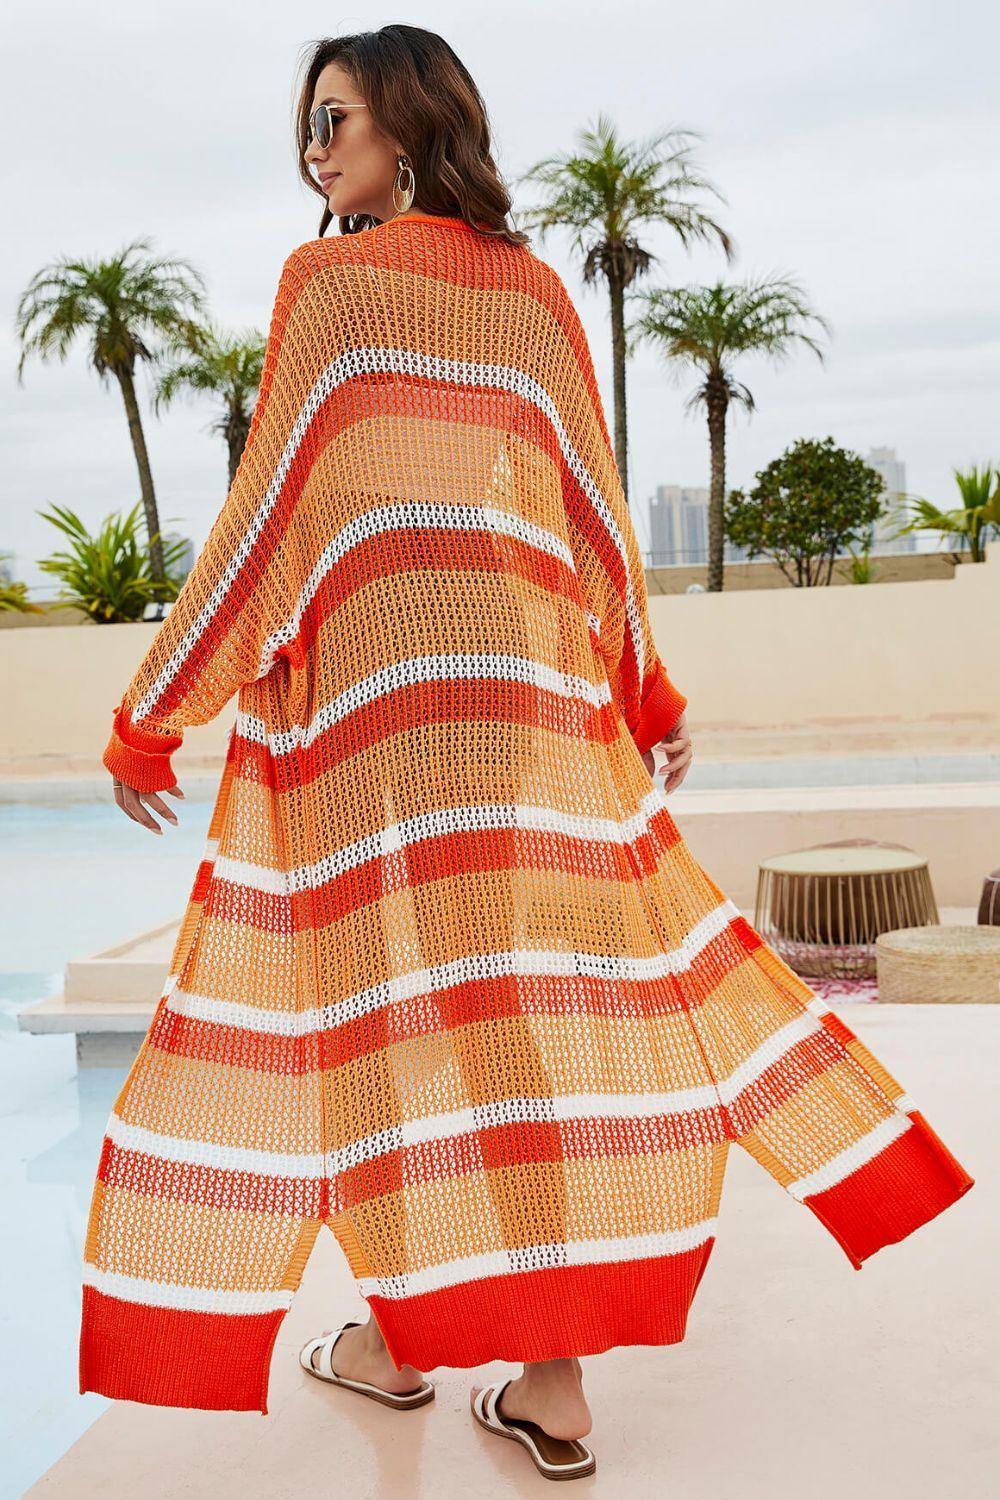 Paradise Found Open Front Striped Beach Cover-Up - MXSTUDIO.COM